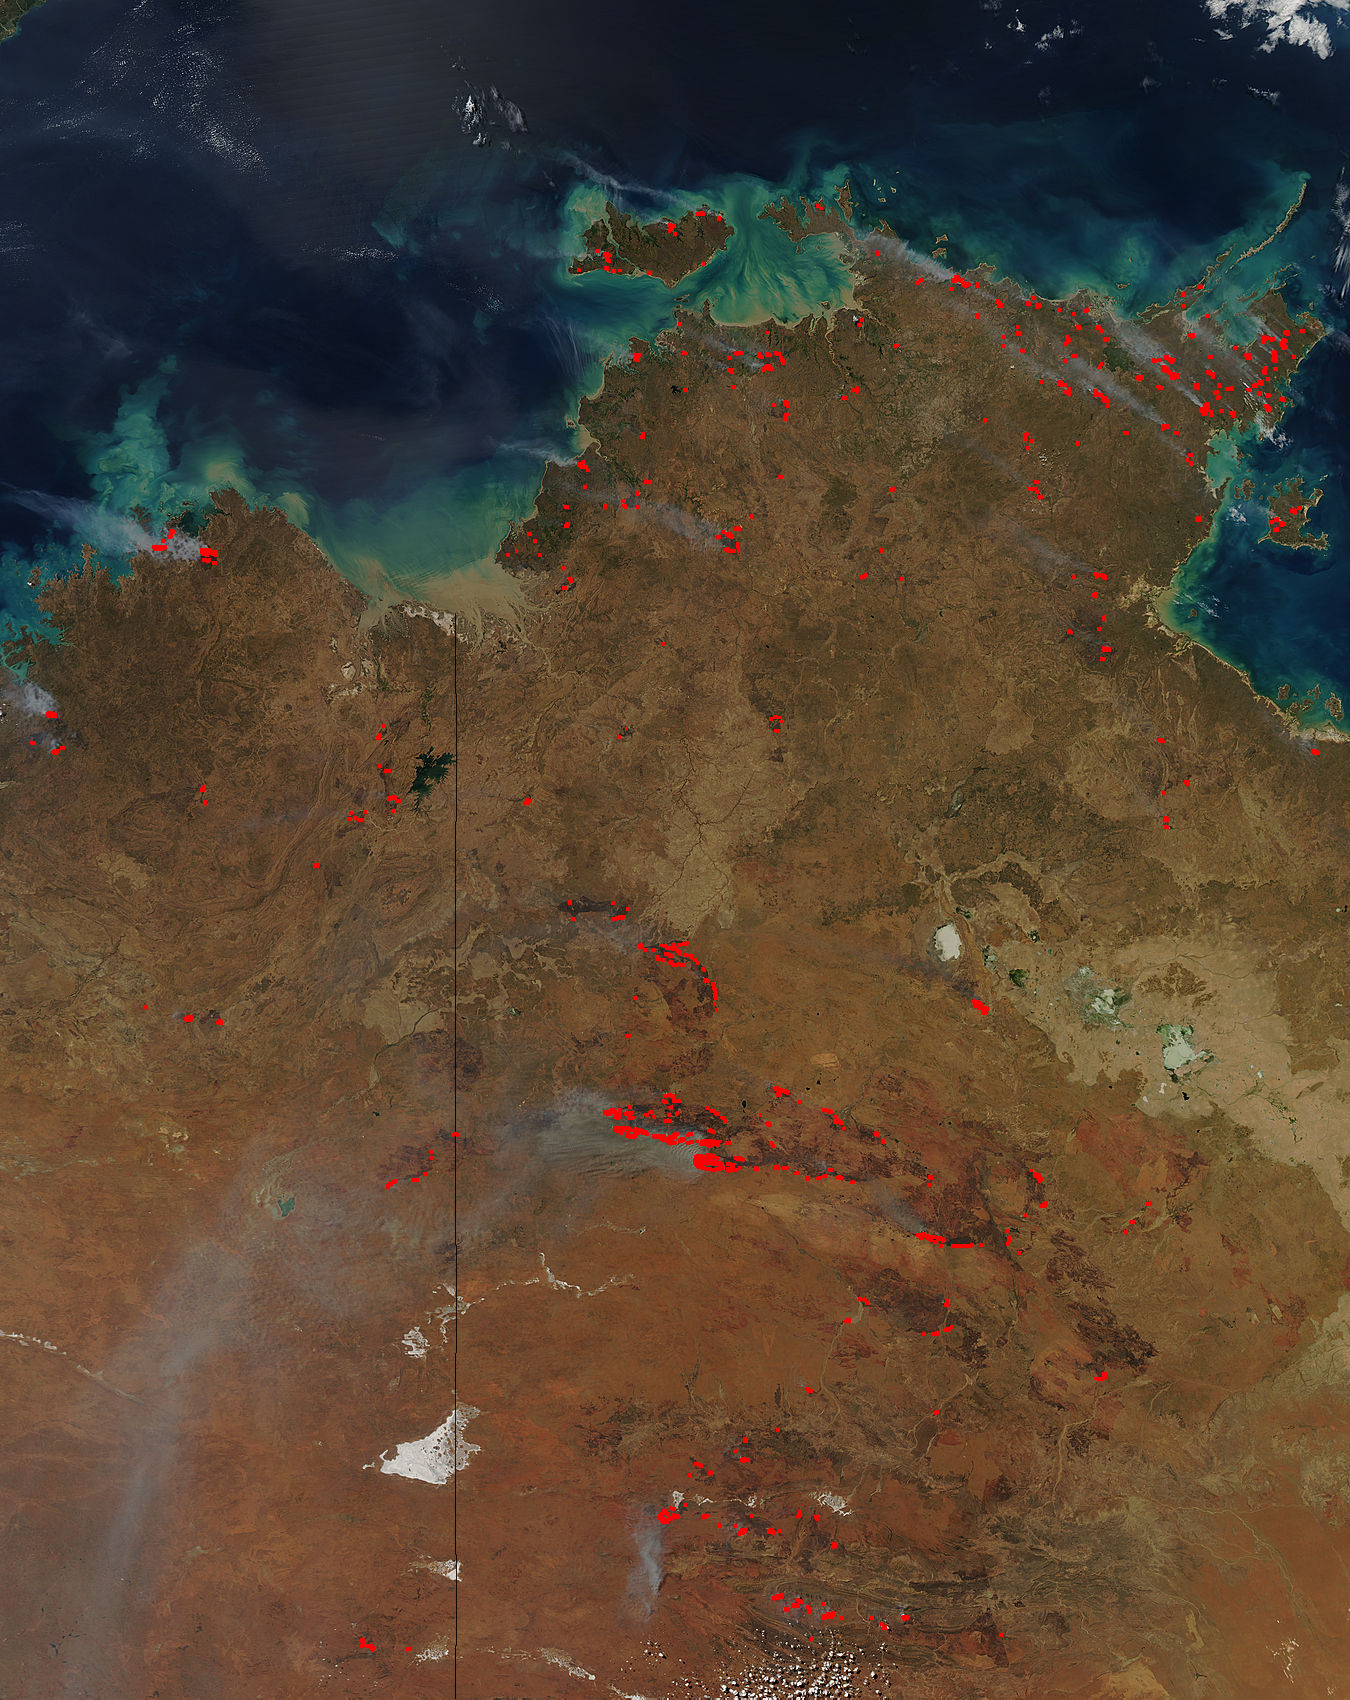 Fires in north central Australia